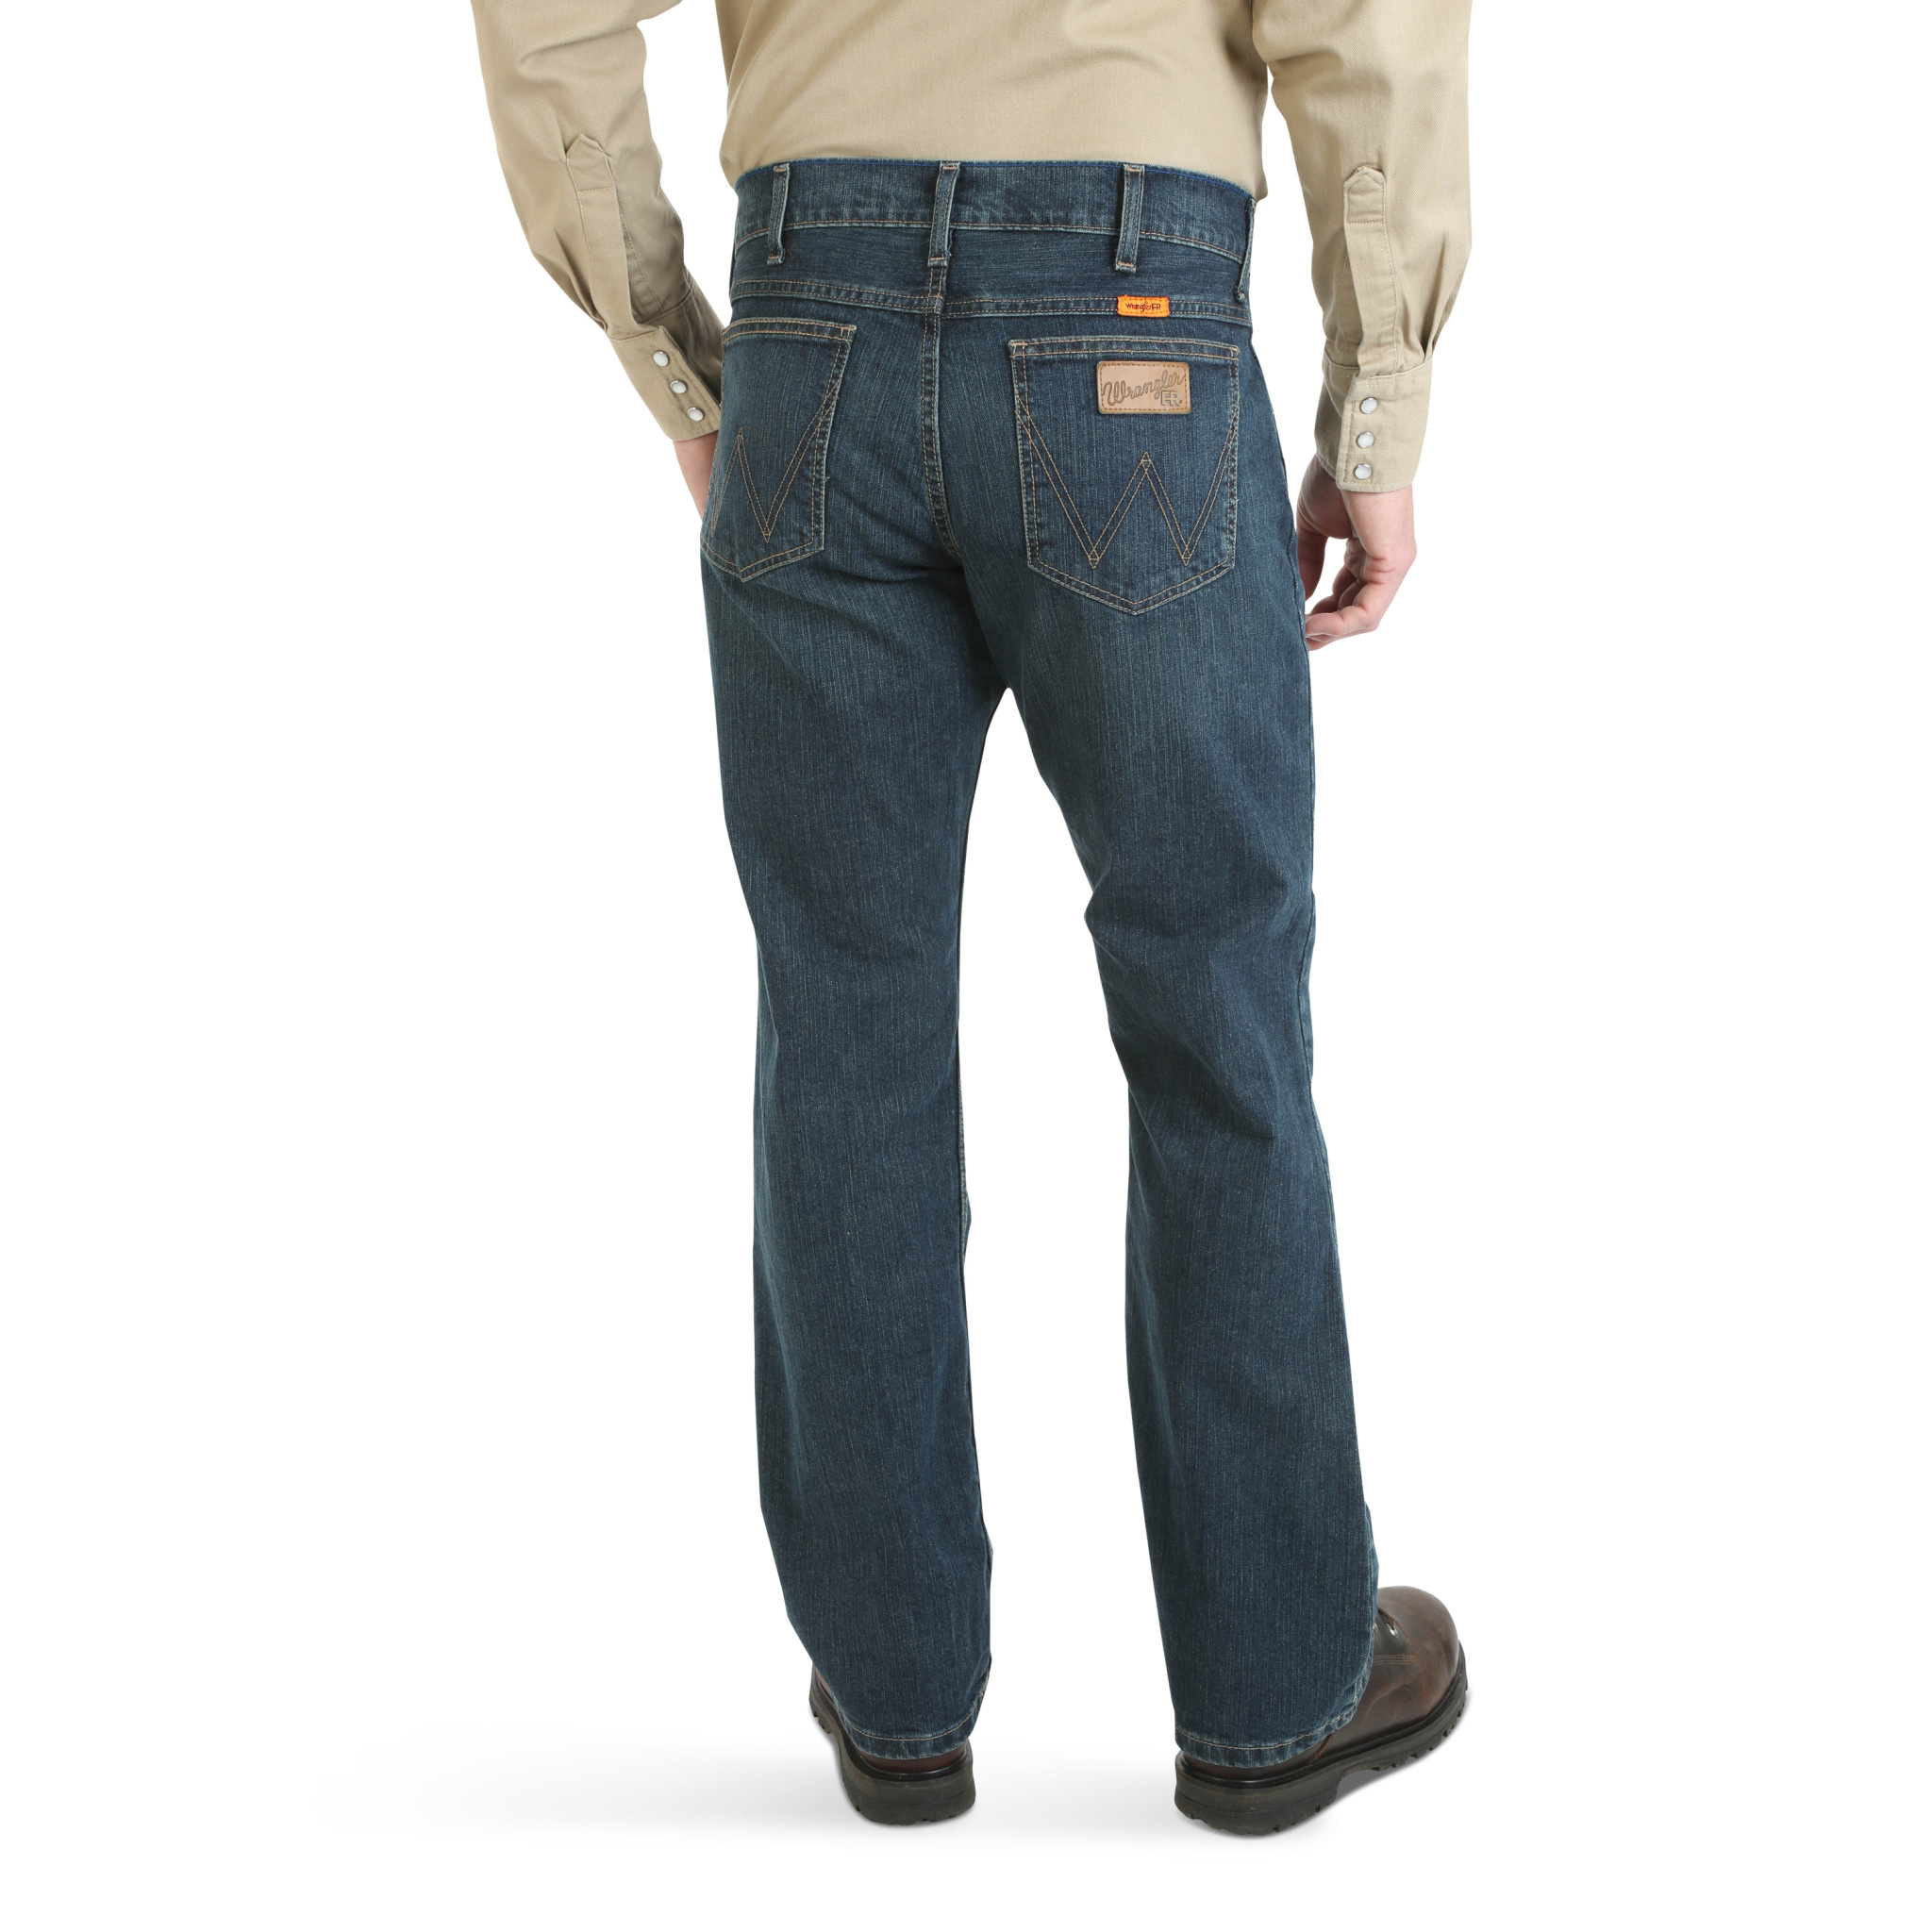 WRANGLER WORK PANTS - AC SLIM BOOT - Rocky Mountain FR Clothing Outlet